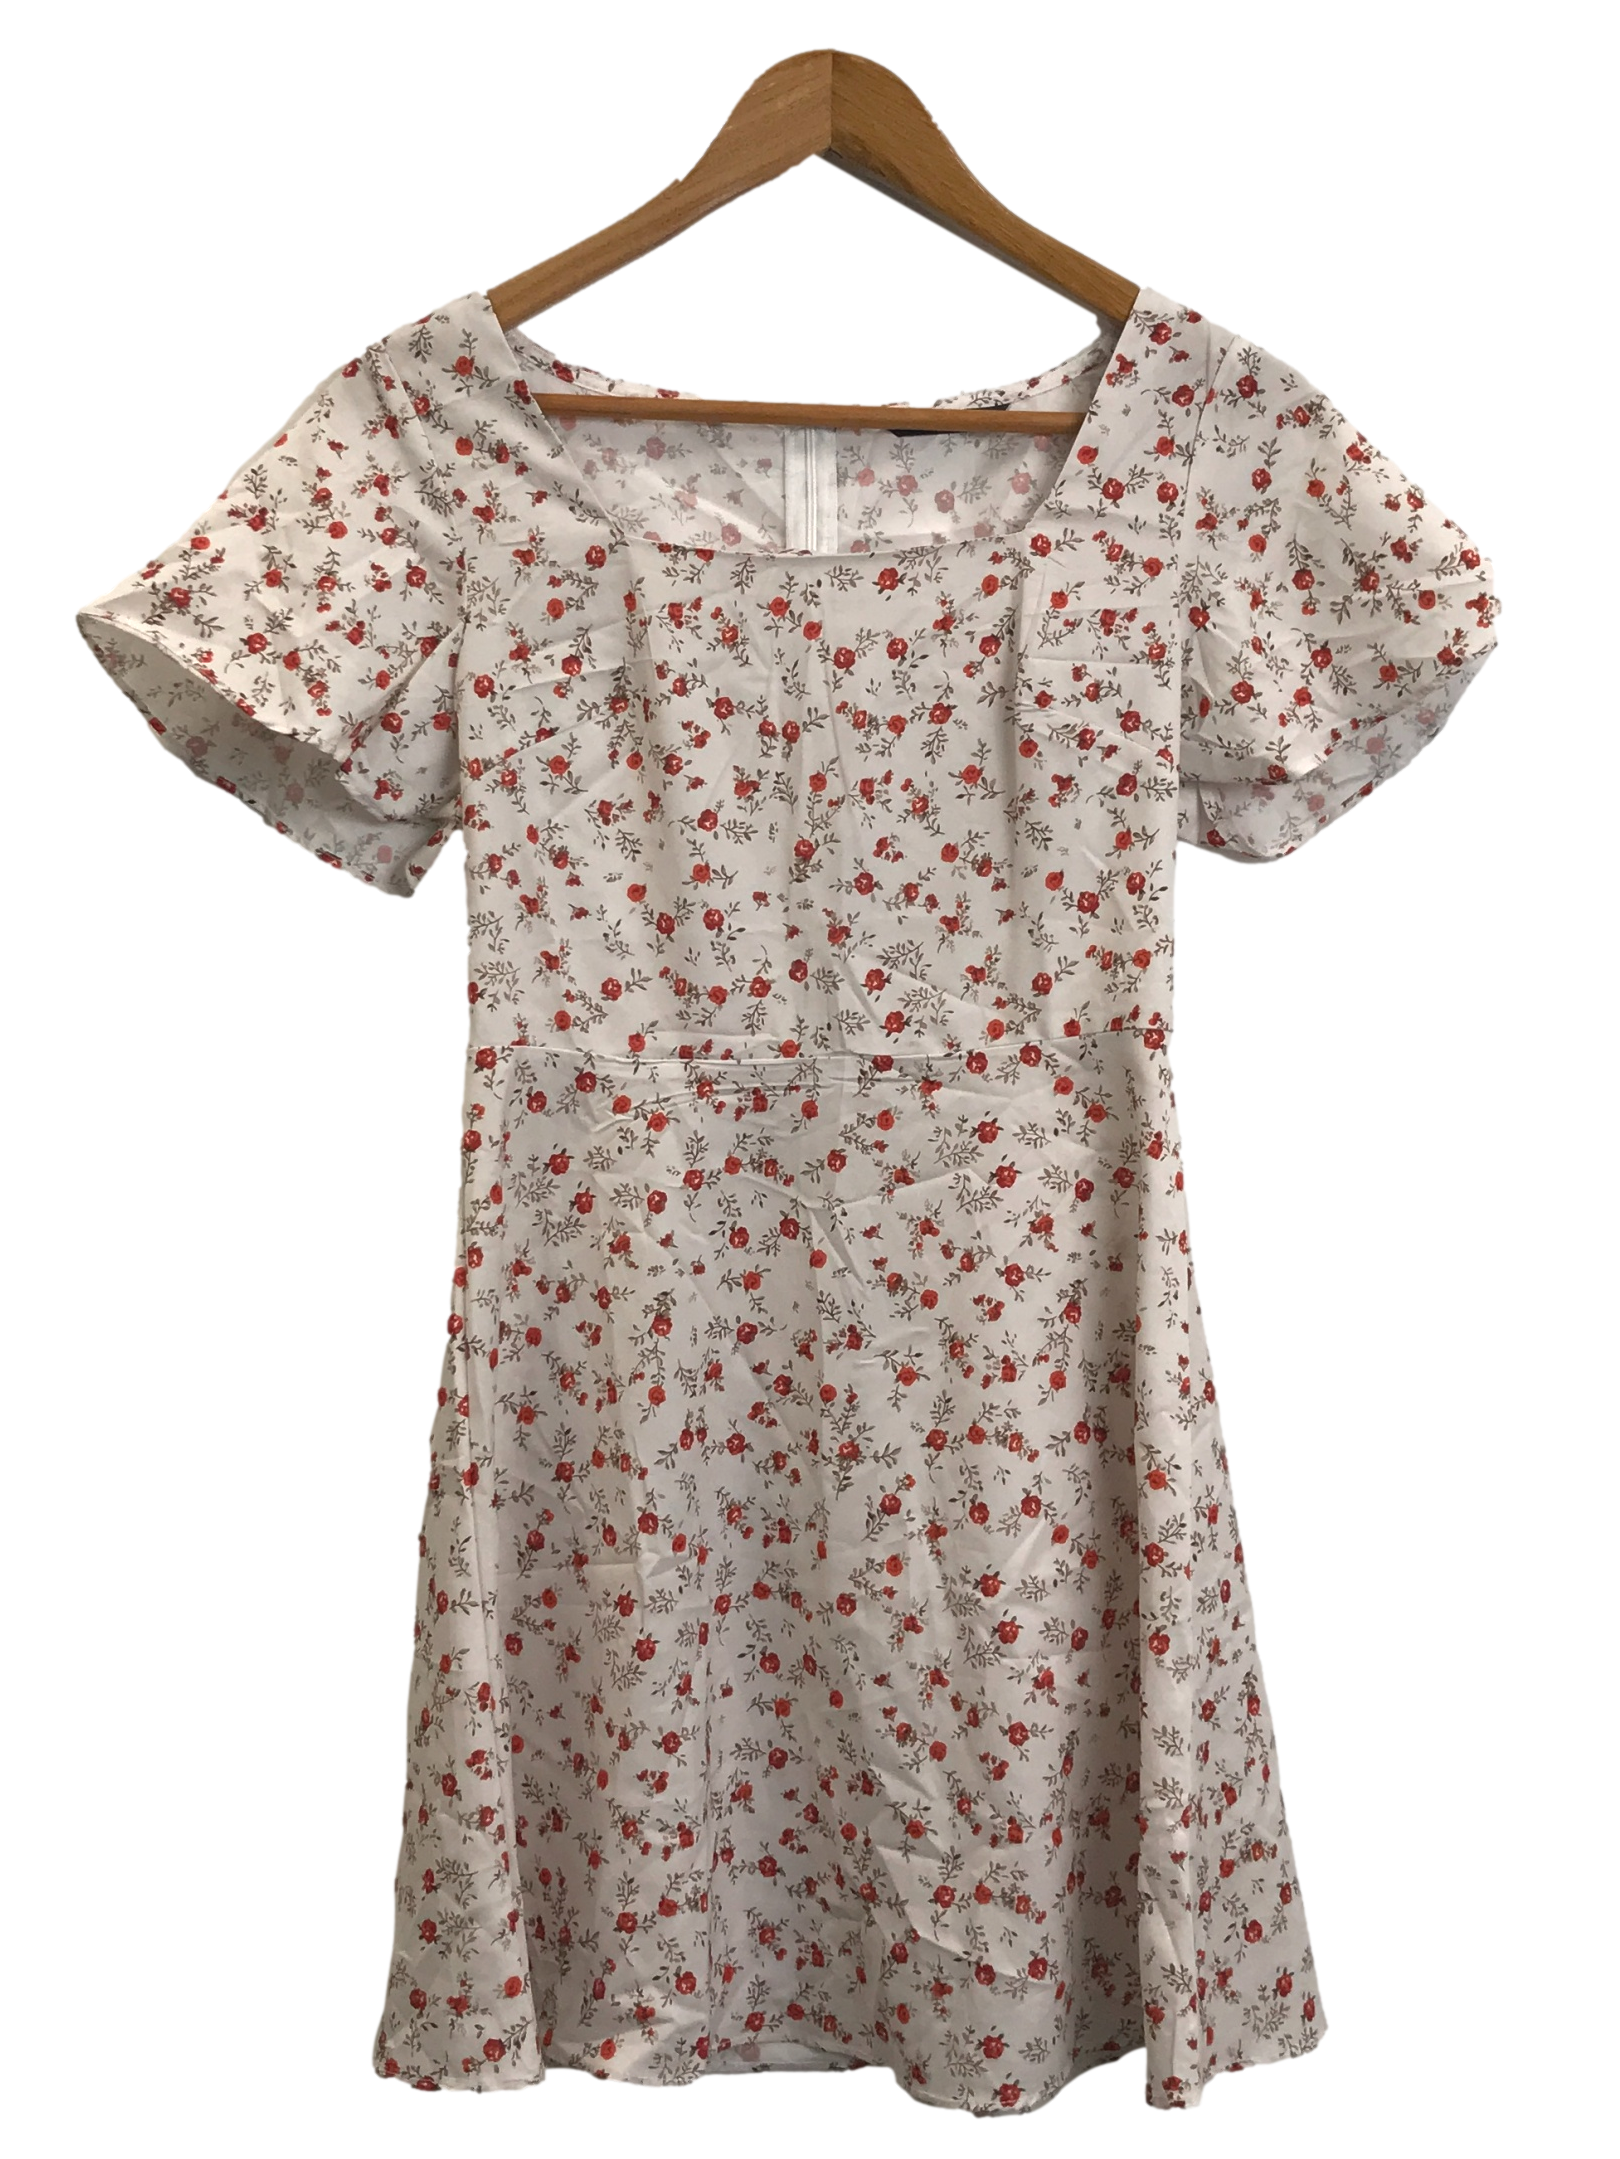 White And Red Printed Flower A-Line Dress